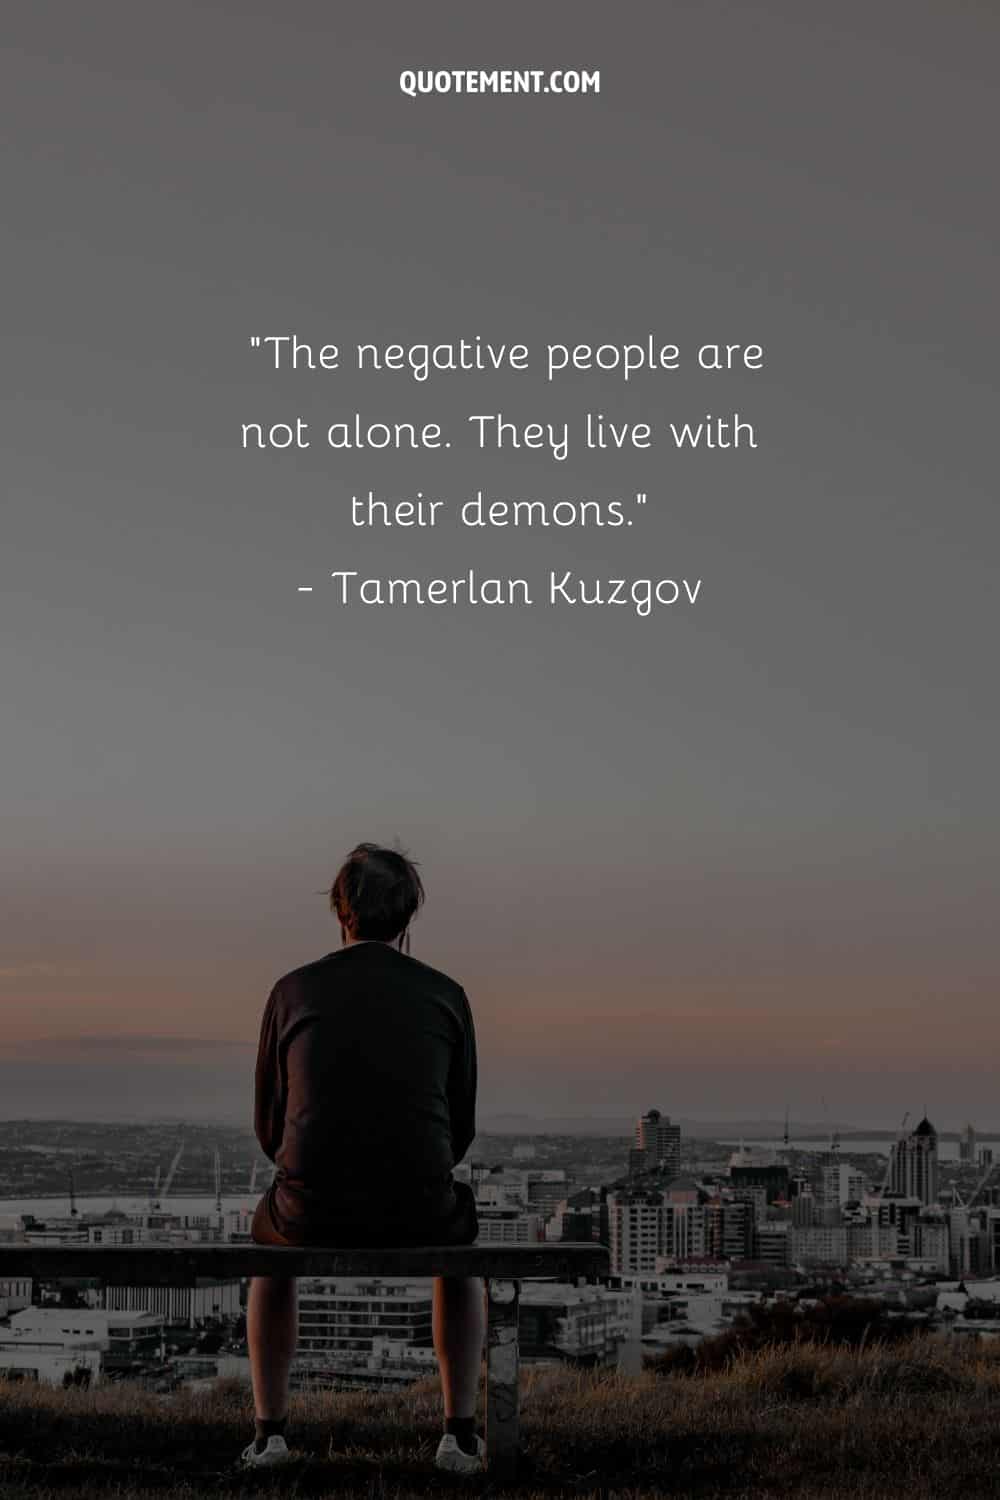 Top negative people quote and a man sitting on a bench looking down at the city